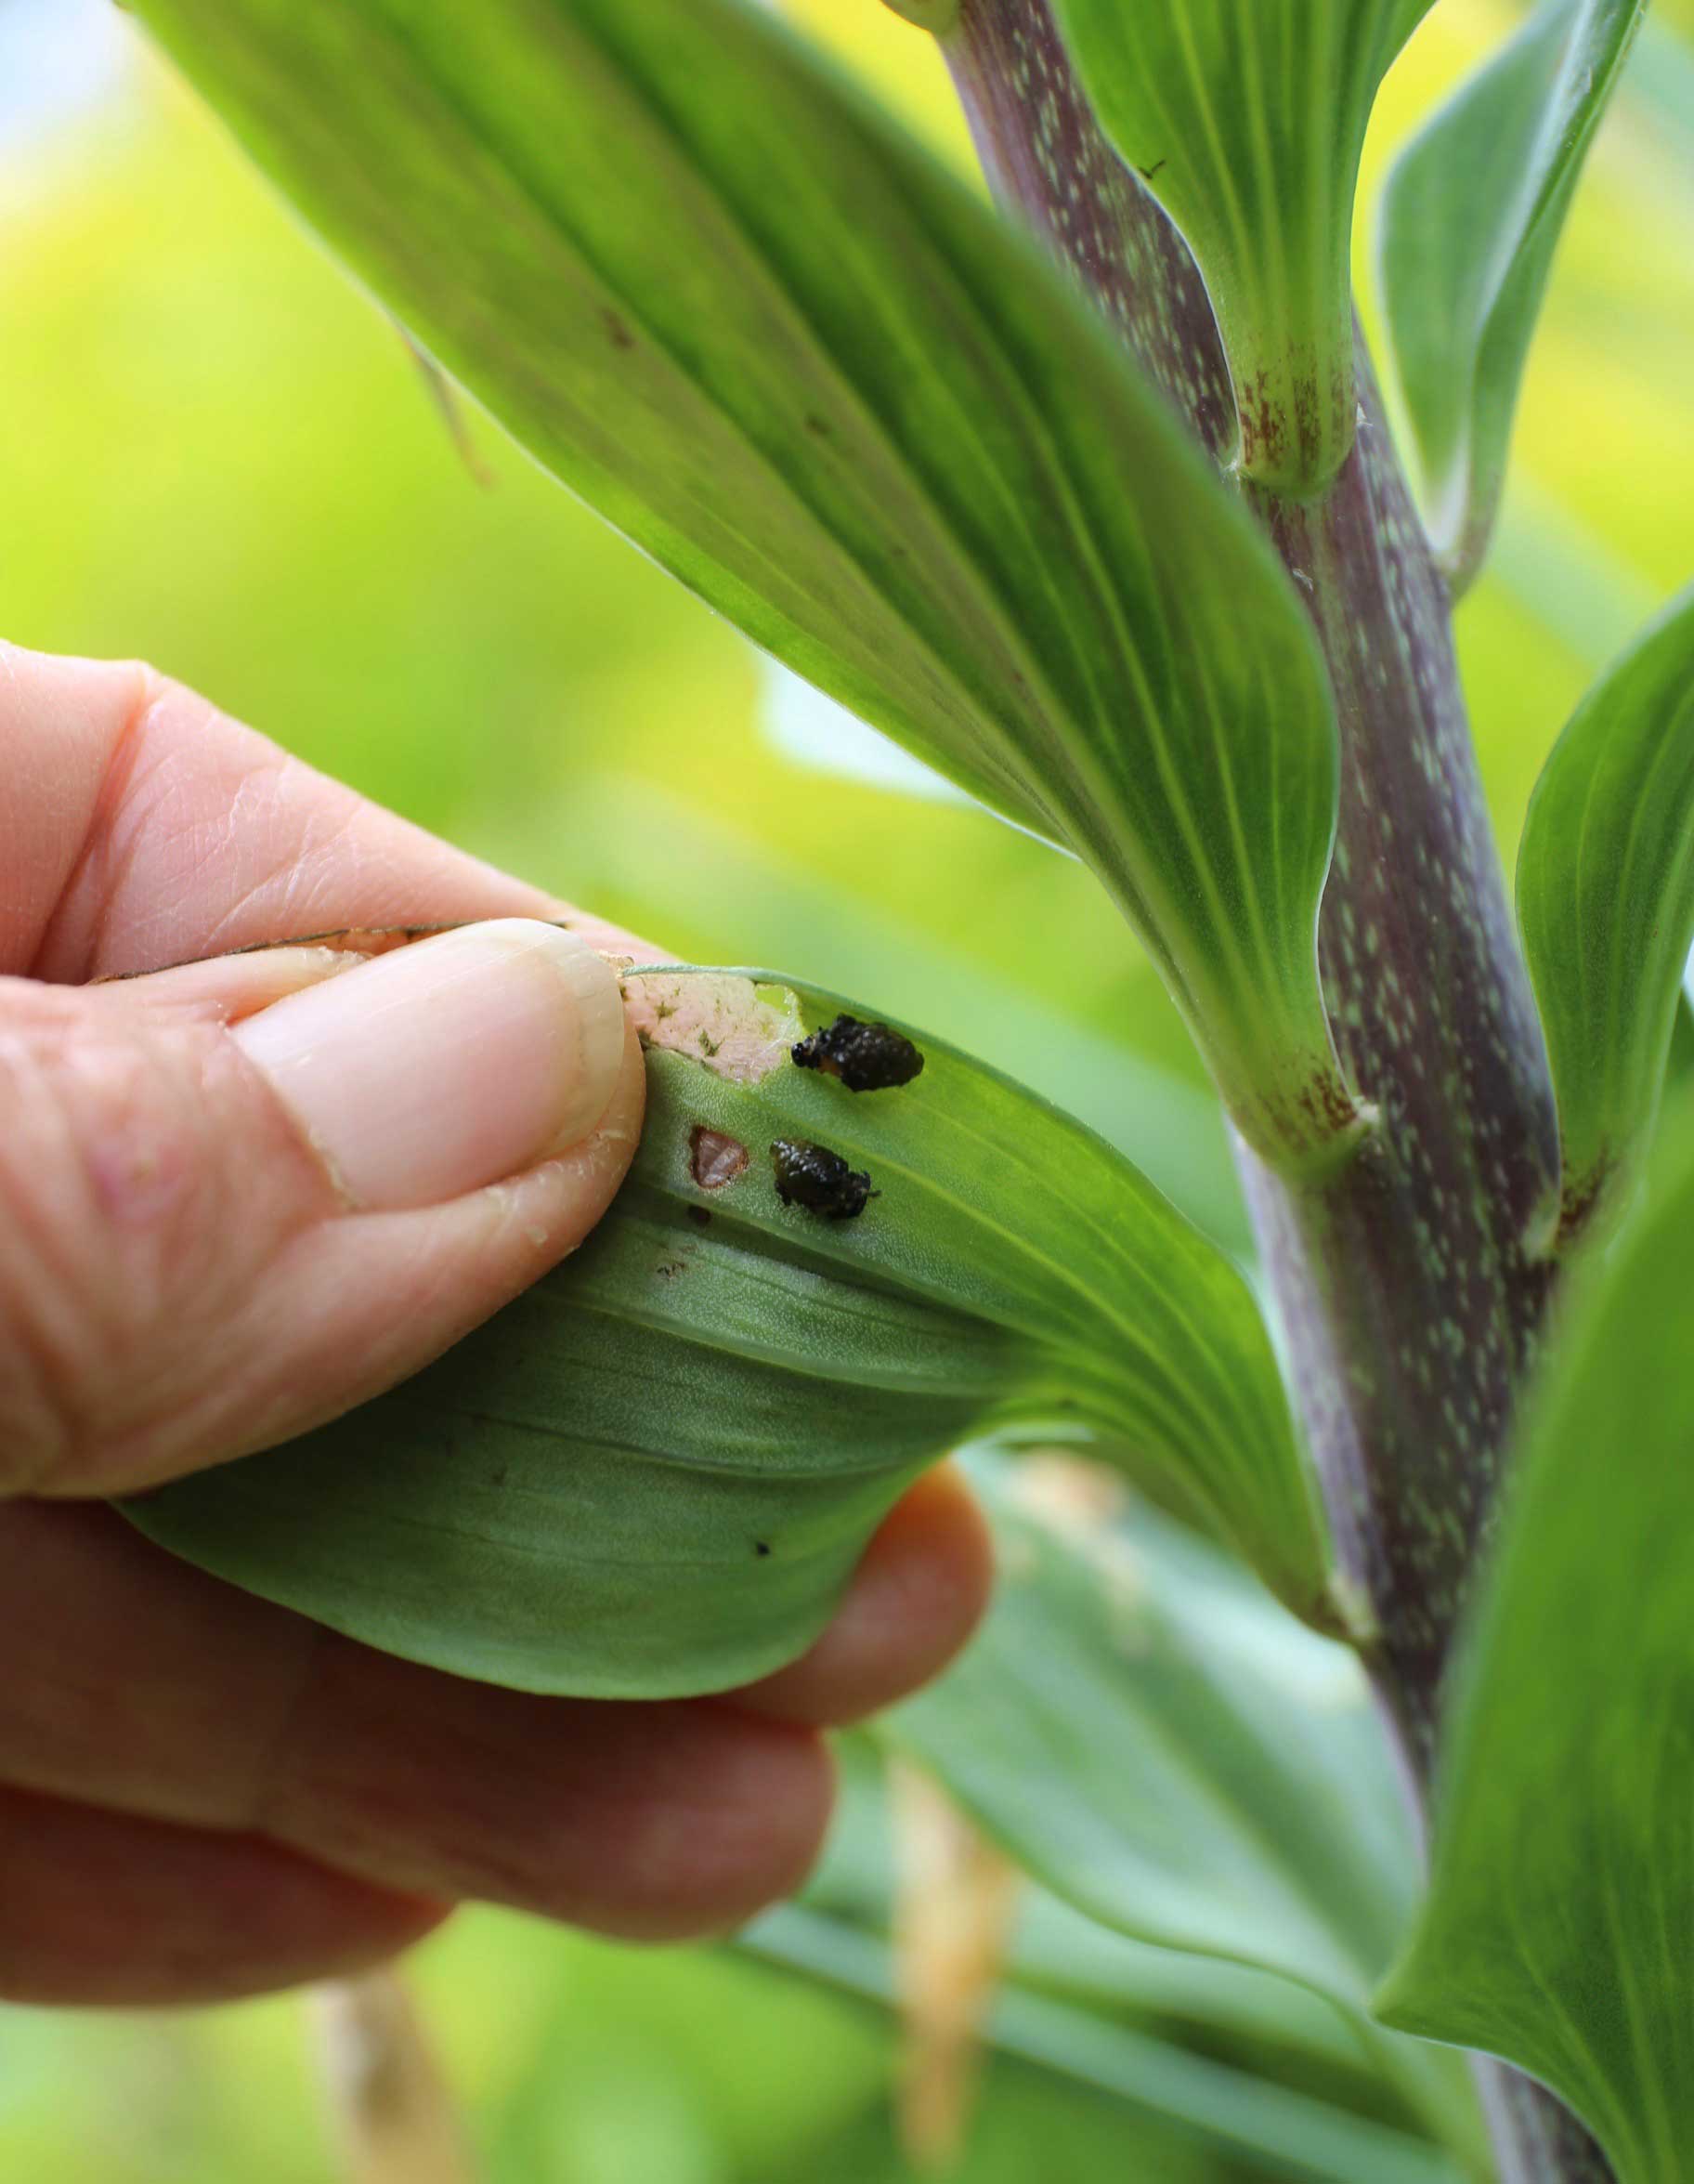 How to Control Lily Leaf Beetle - Longfield Gardens